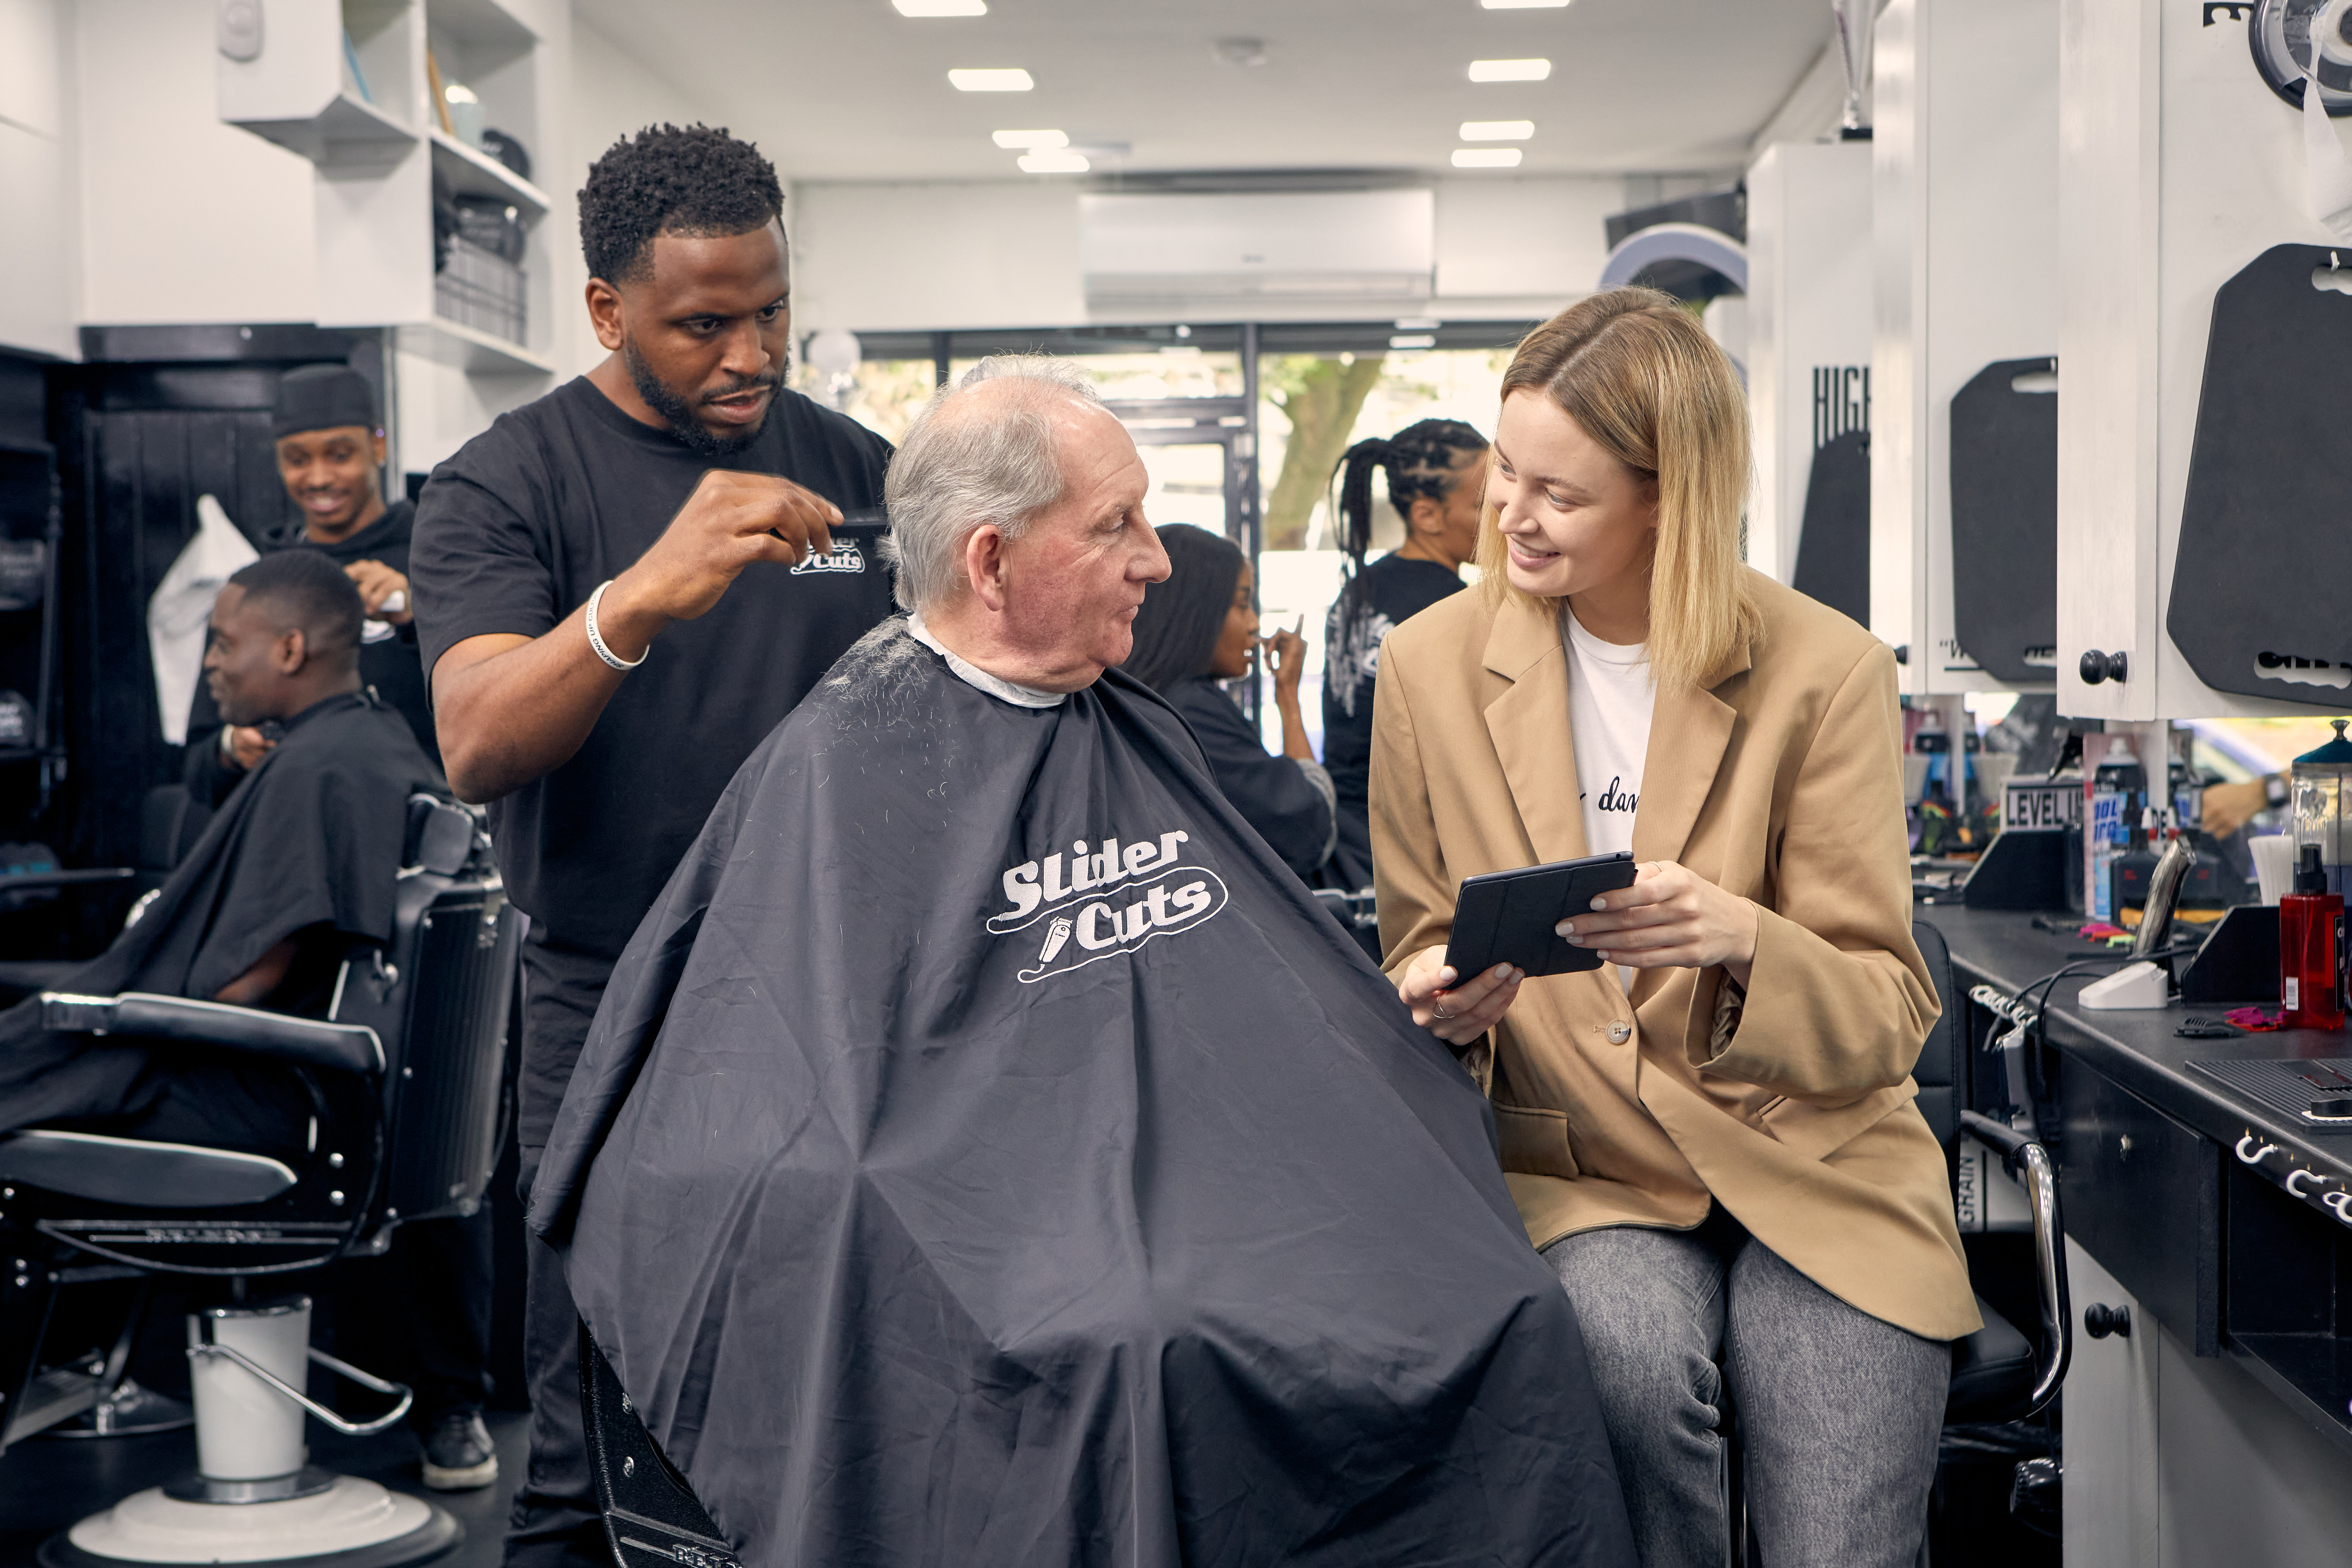 Mastercard and celebrity barbershop SliderCuts launches two-day event for those most in need of free online guidance and money advice, with a haircut included